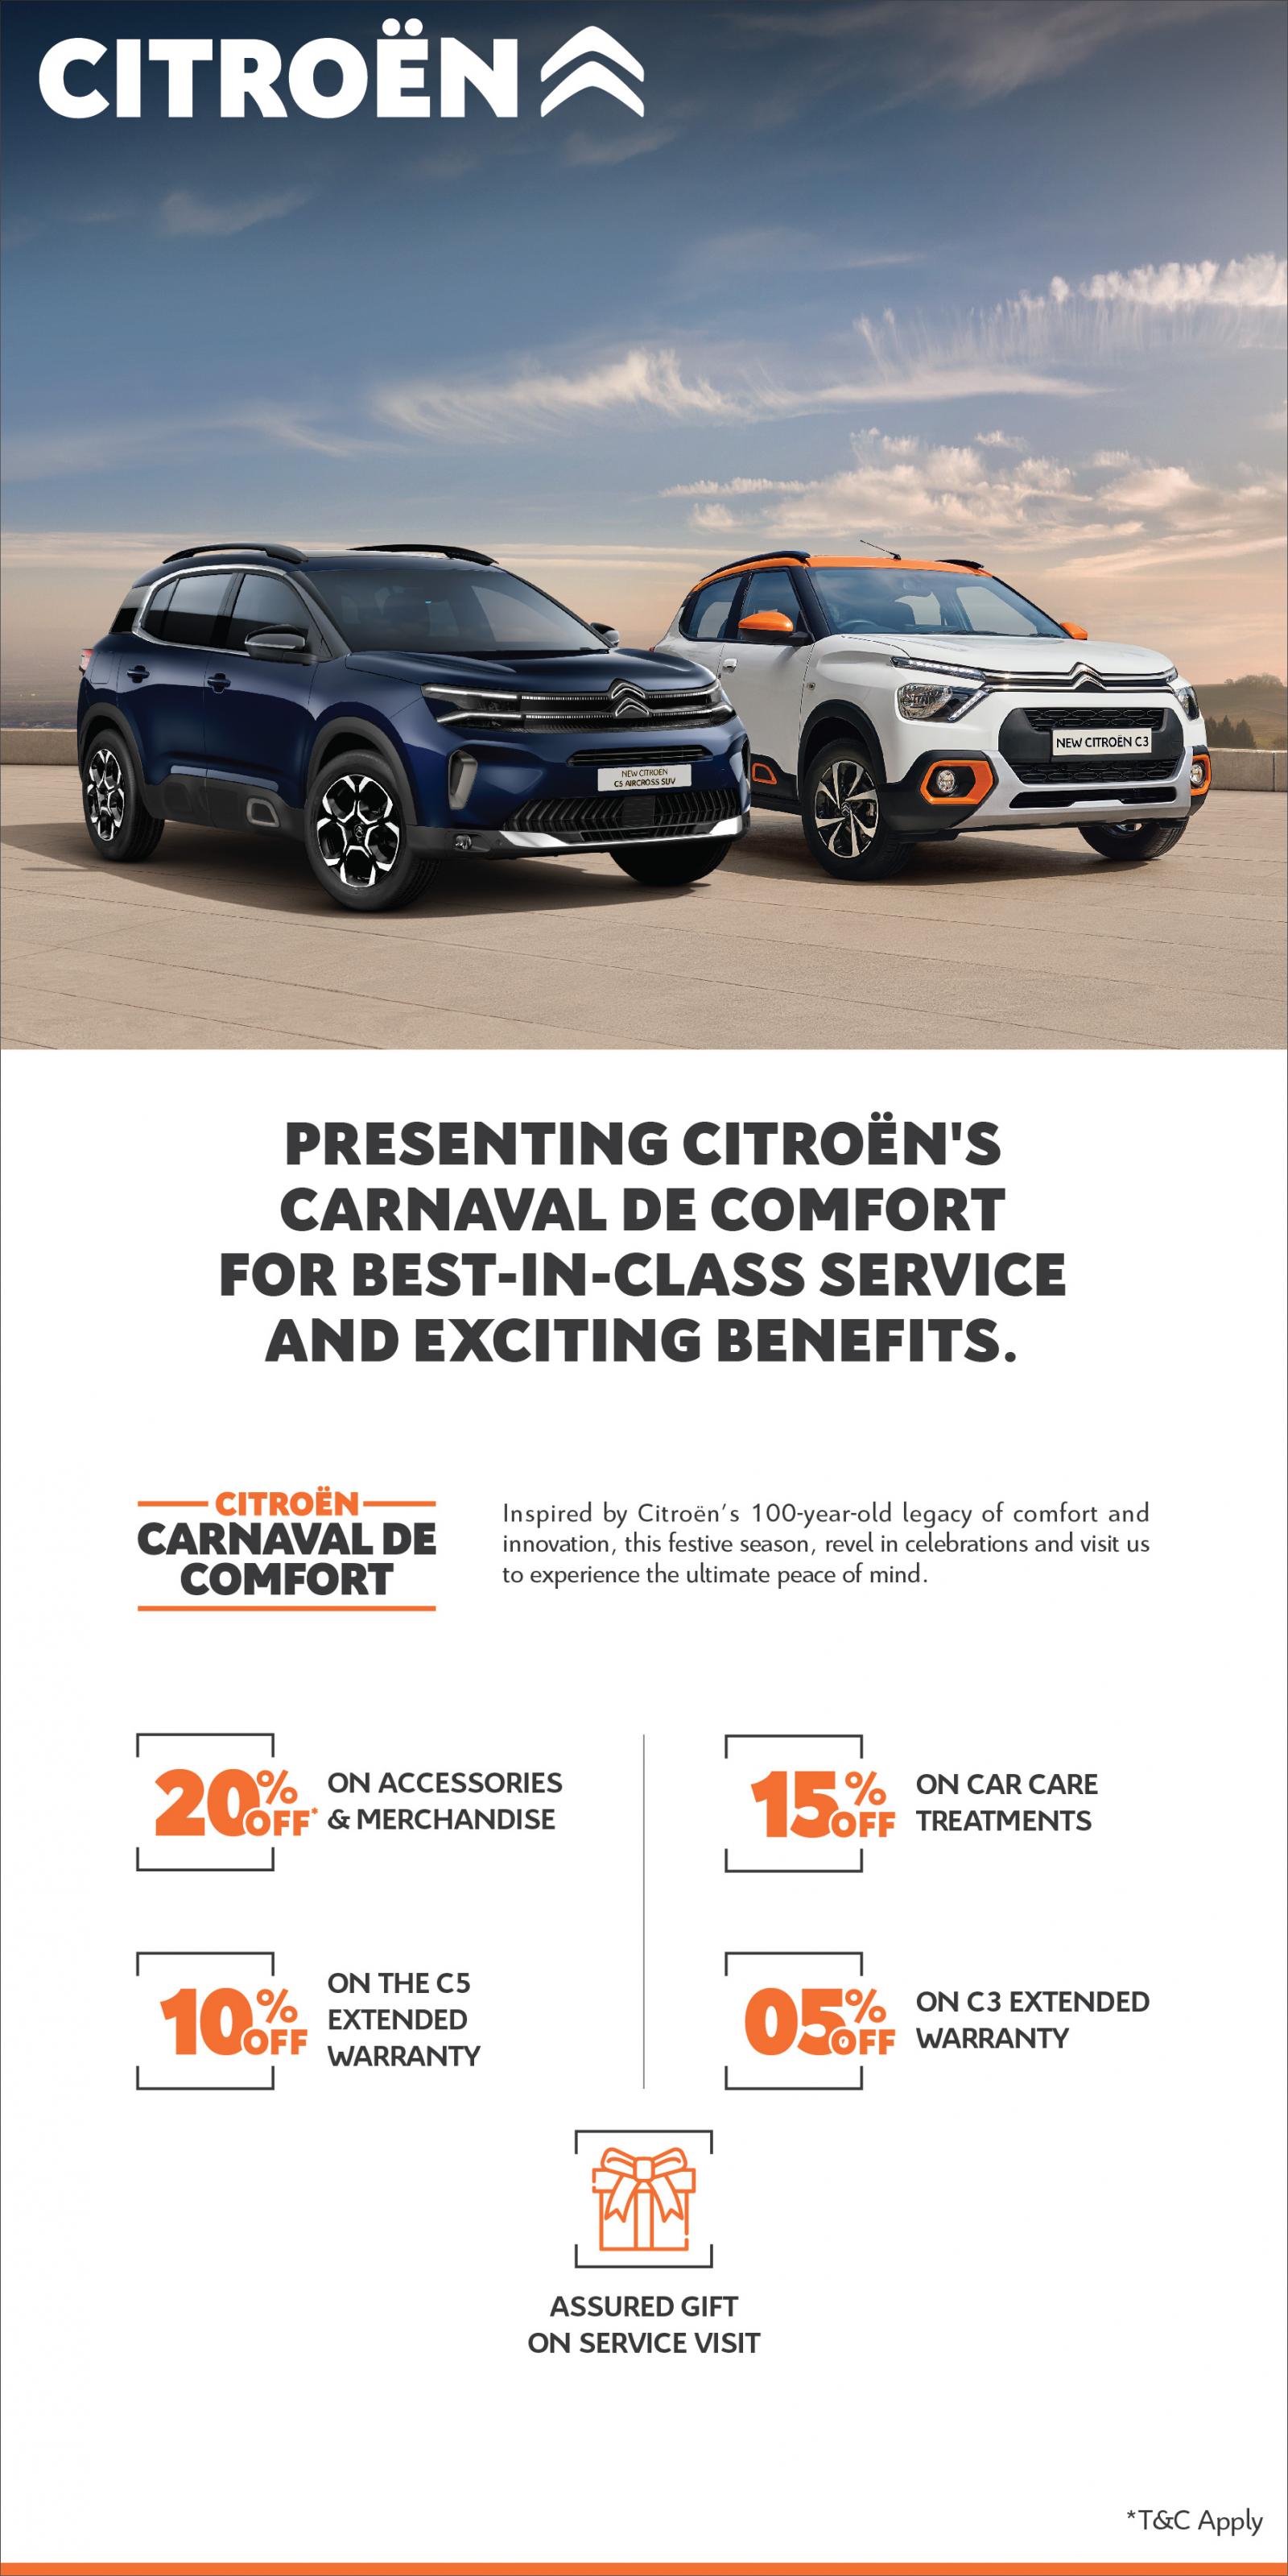 Citroen Launches Its Service Festival - Save Upto 20% On Merchandise &  Accessories